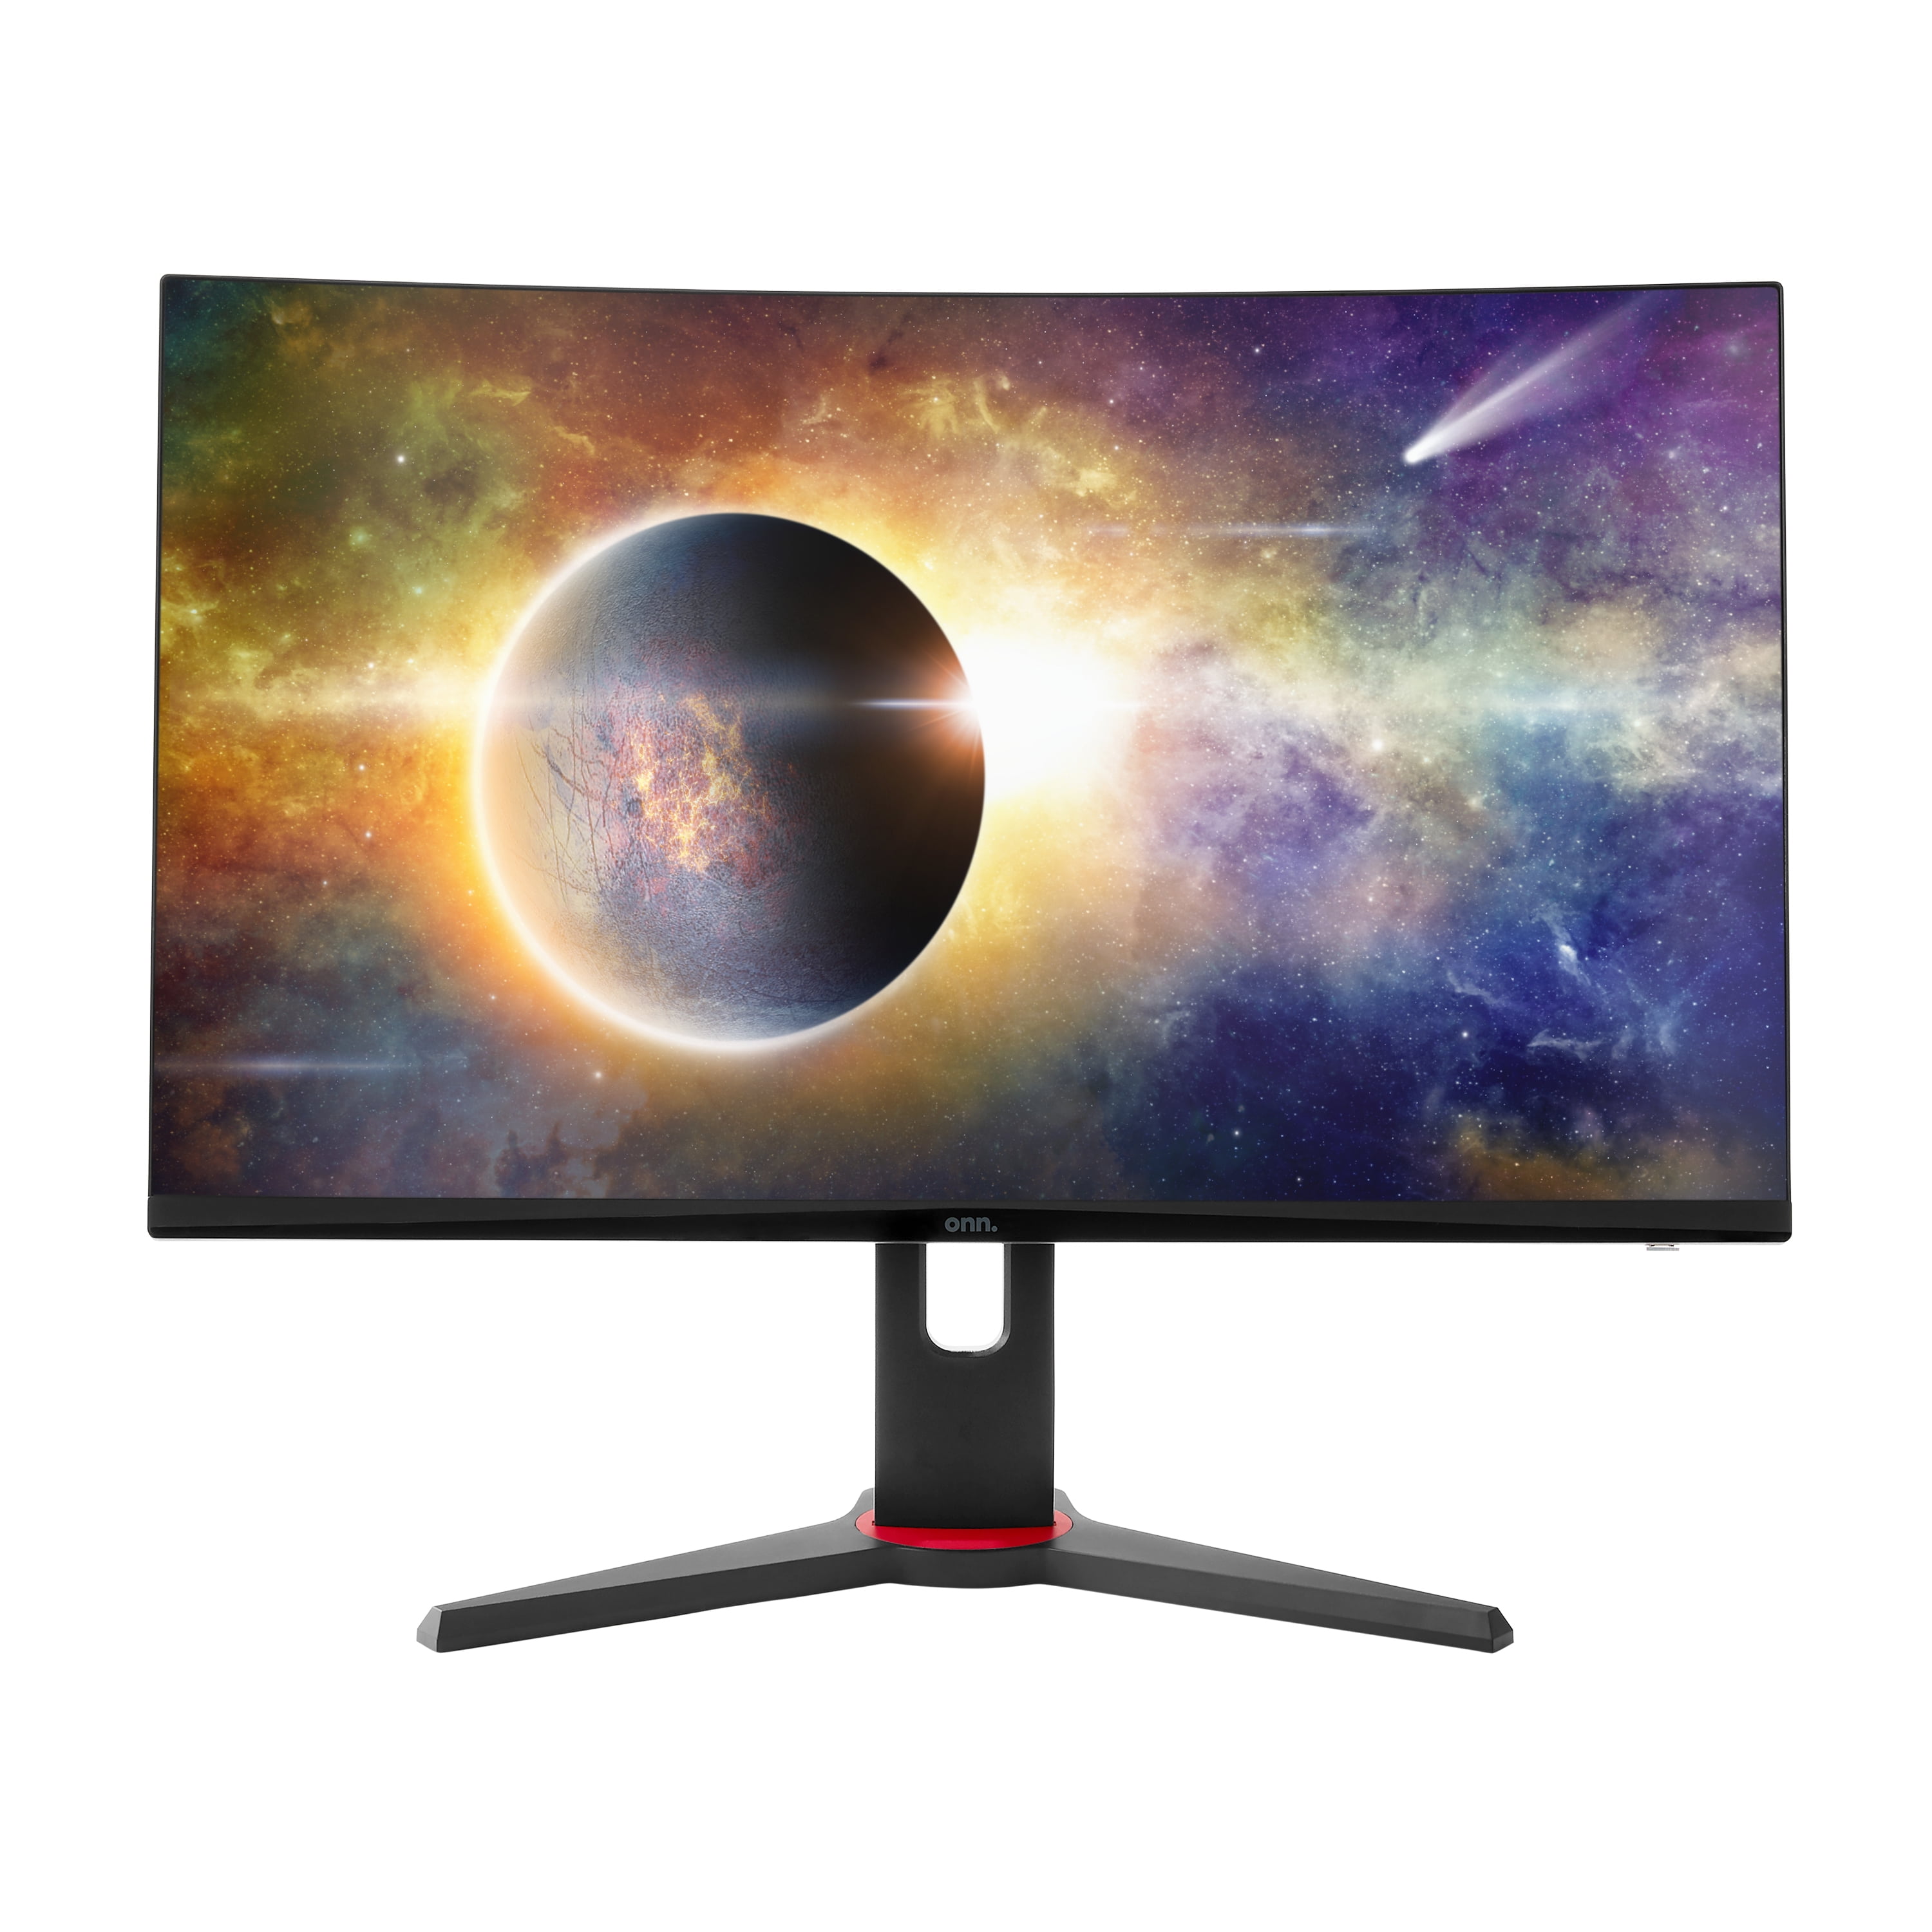 onn. 27 Curved QHD (2560 x 1440p) 165Hz 1ms Adaptive Sync Gaming Monitor  with Cables, Black, New 